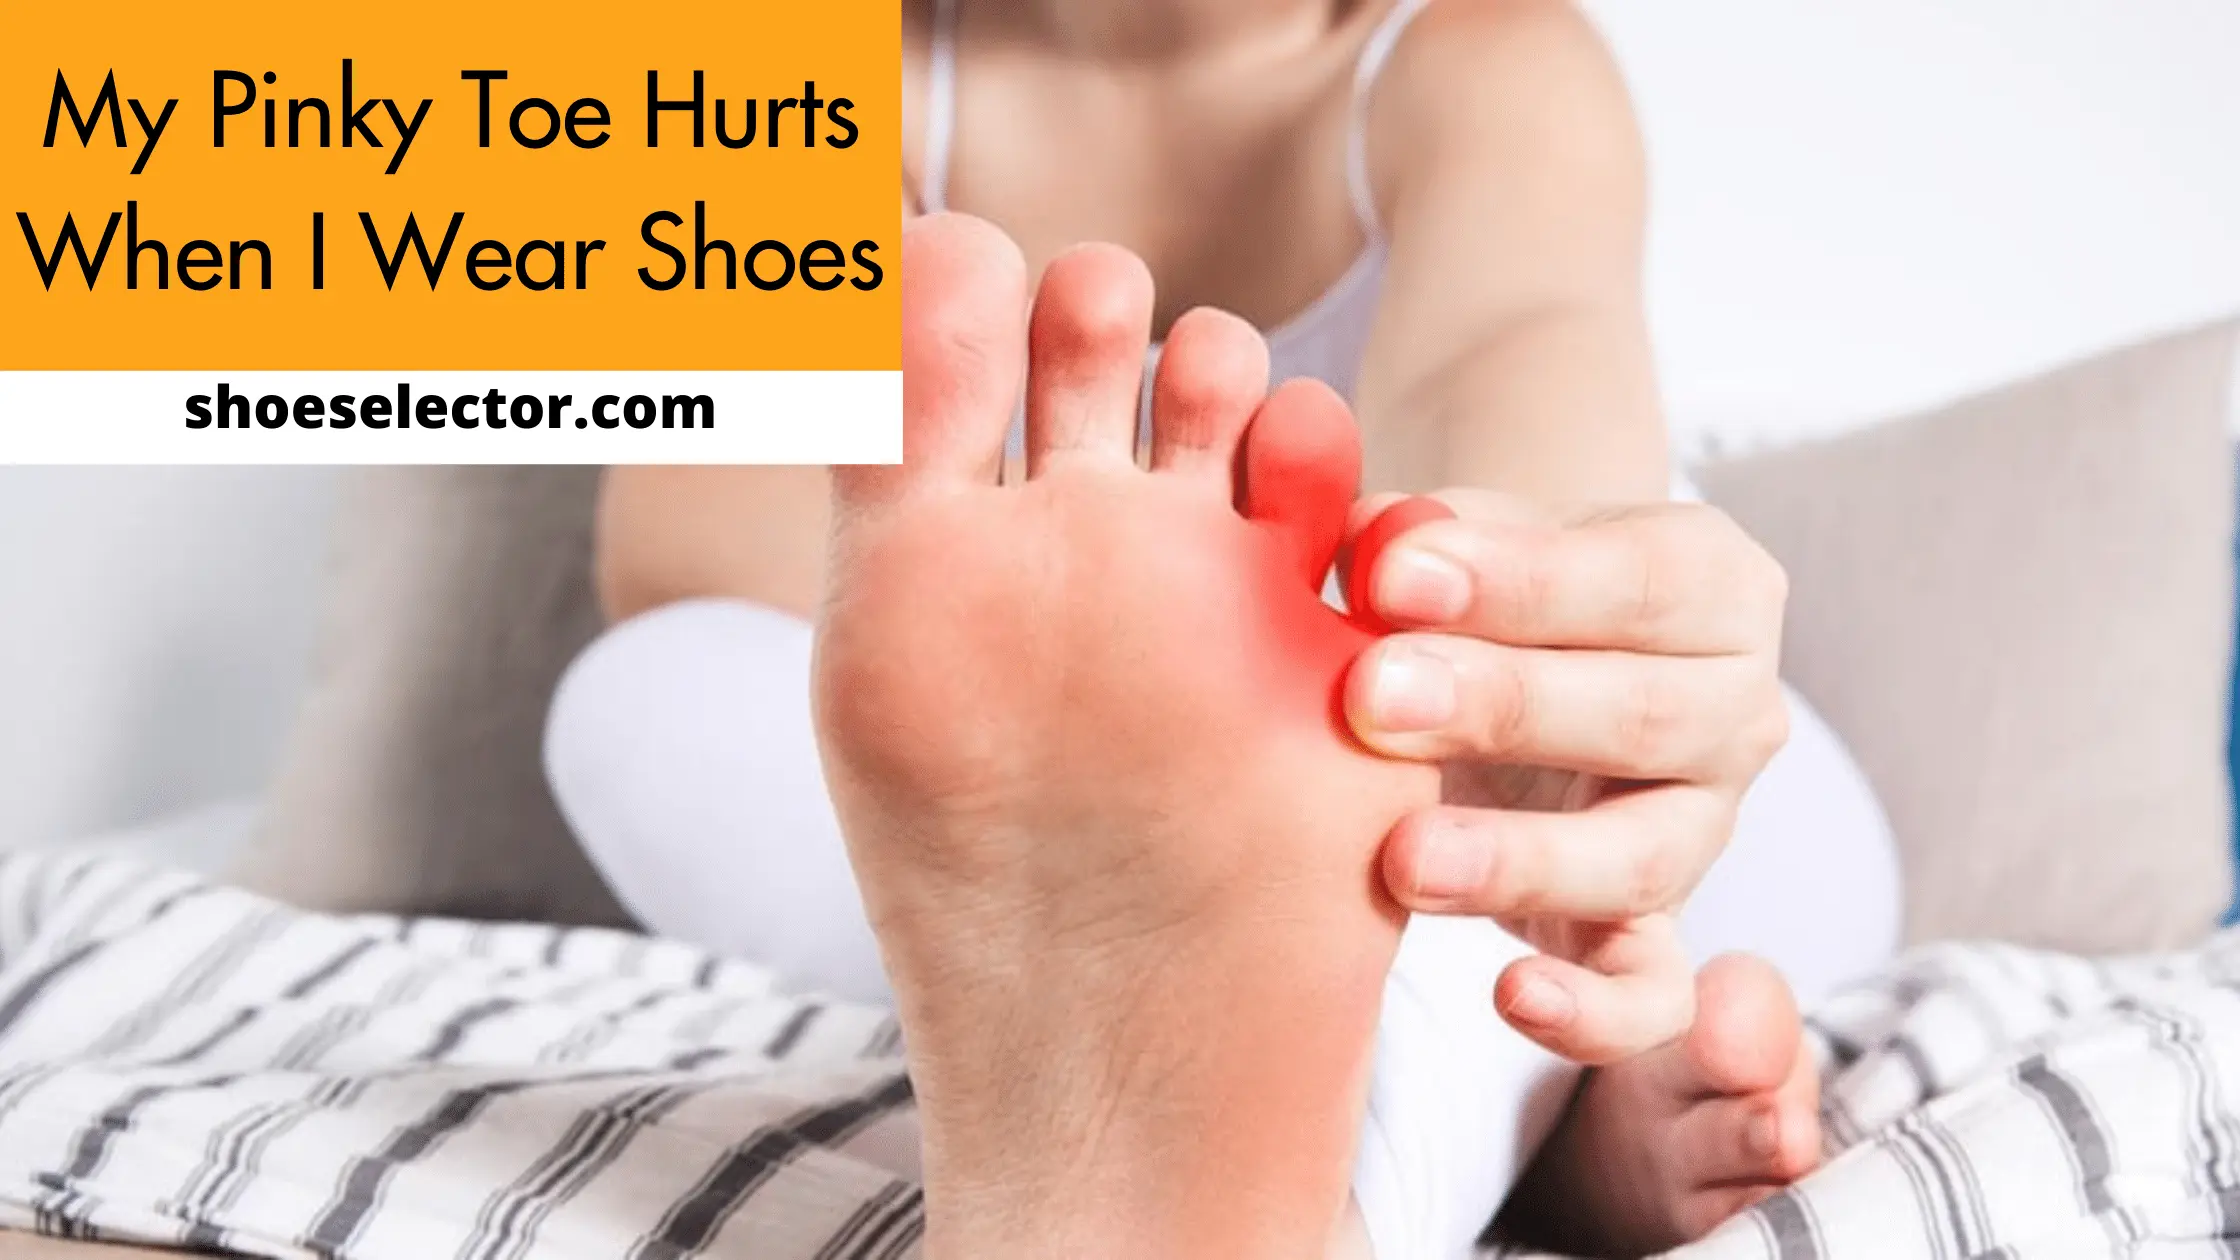 My Pinky Toe Hurts When I Wear Shoes - #1 Recommended Guide